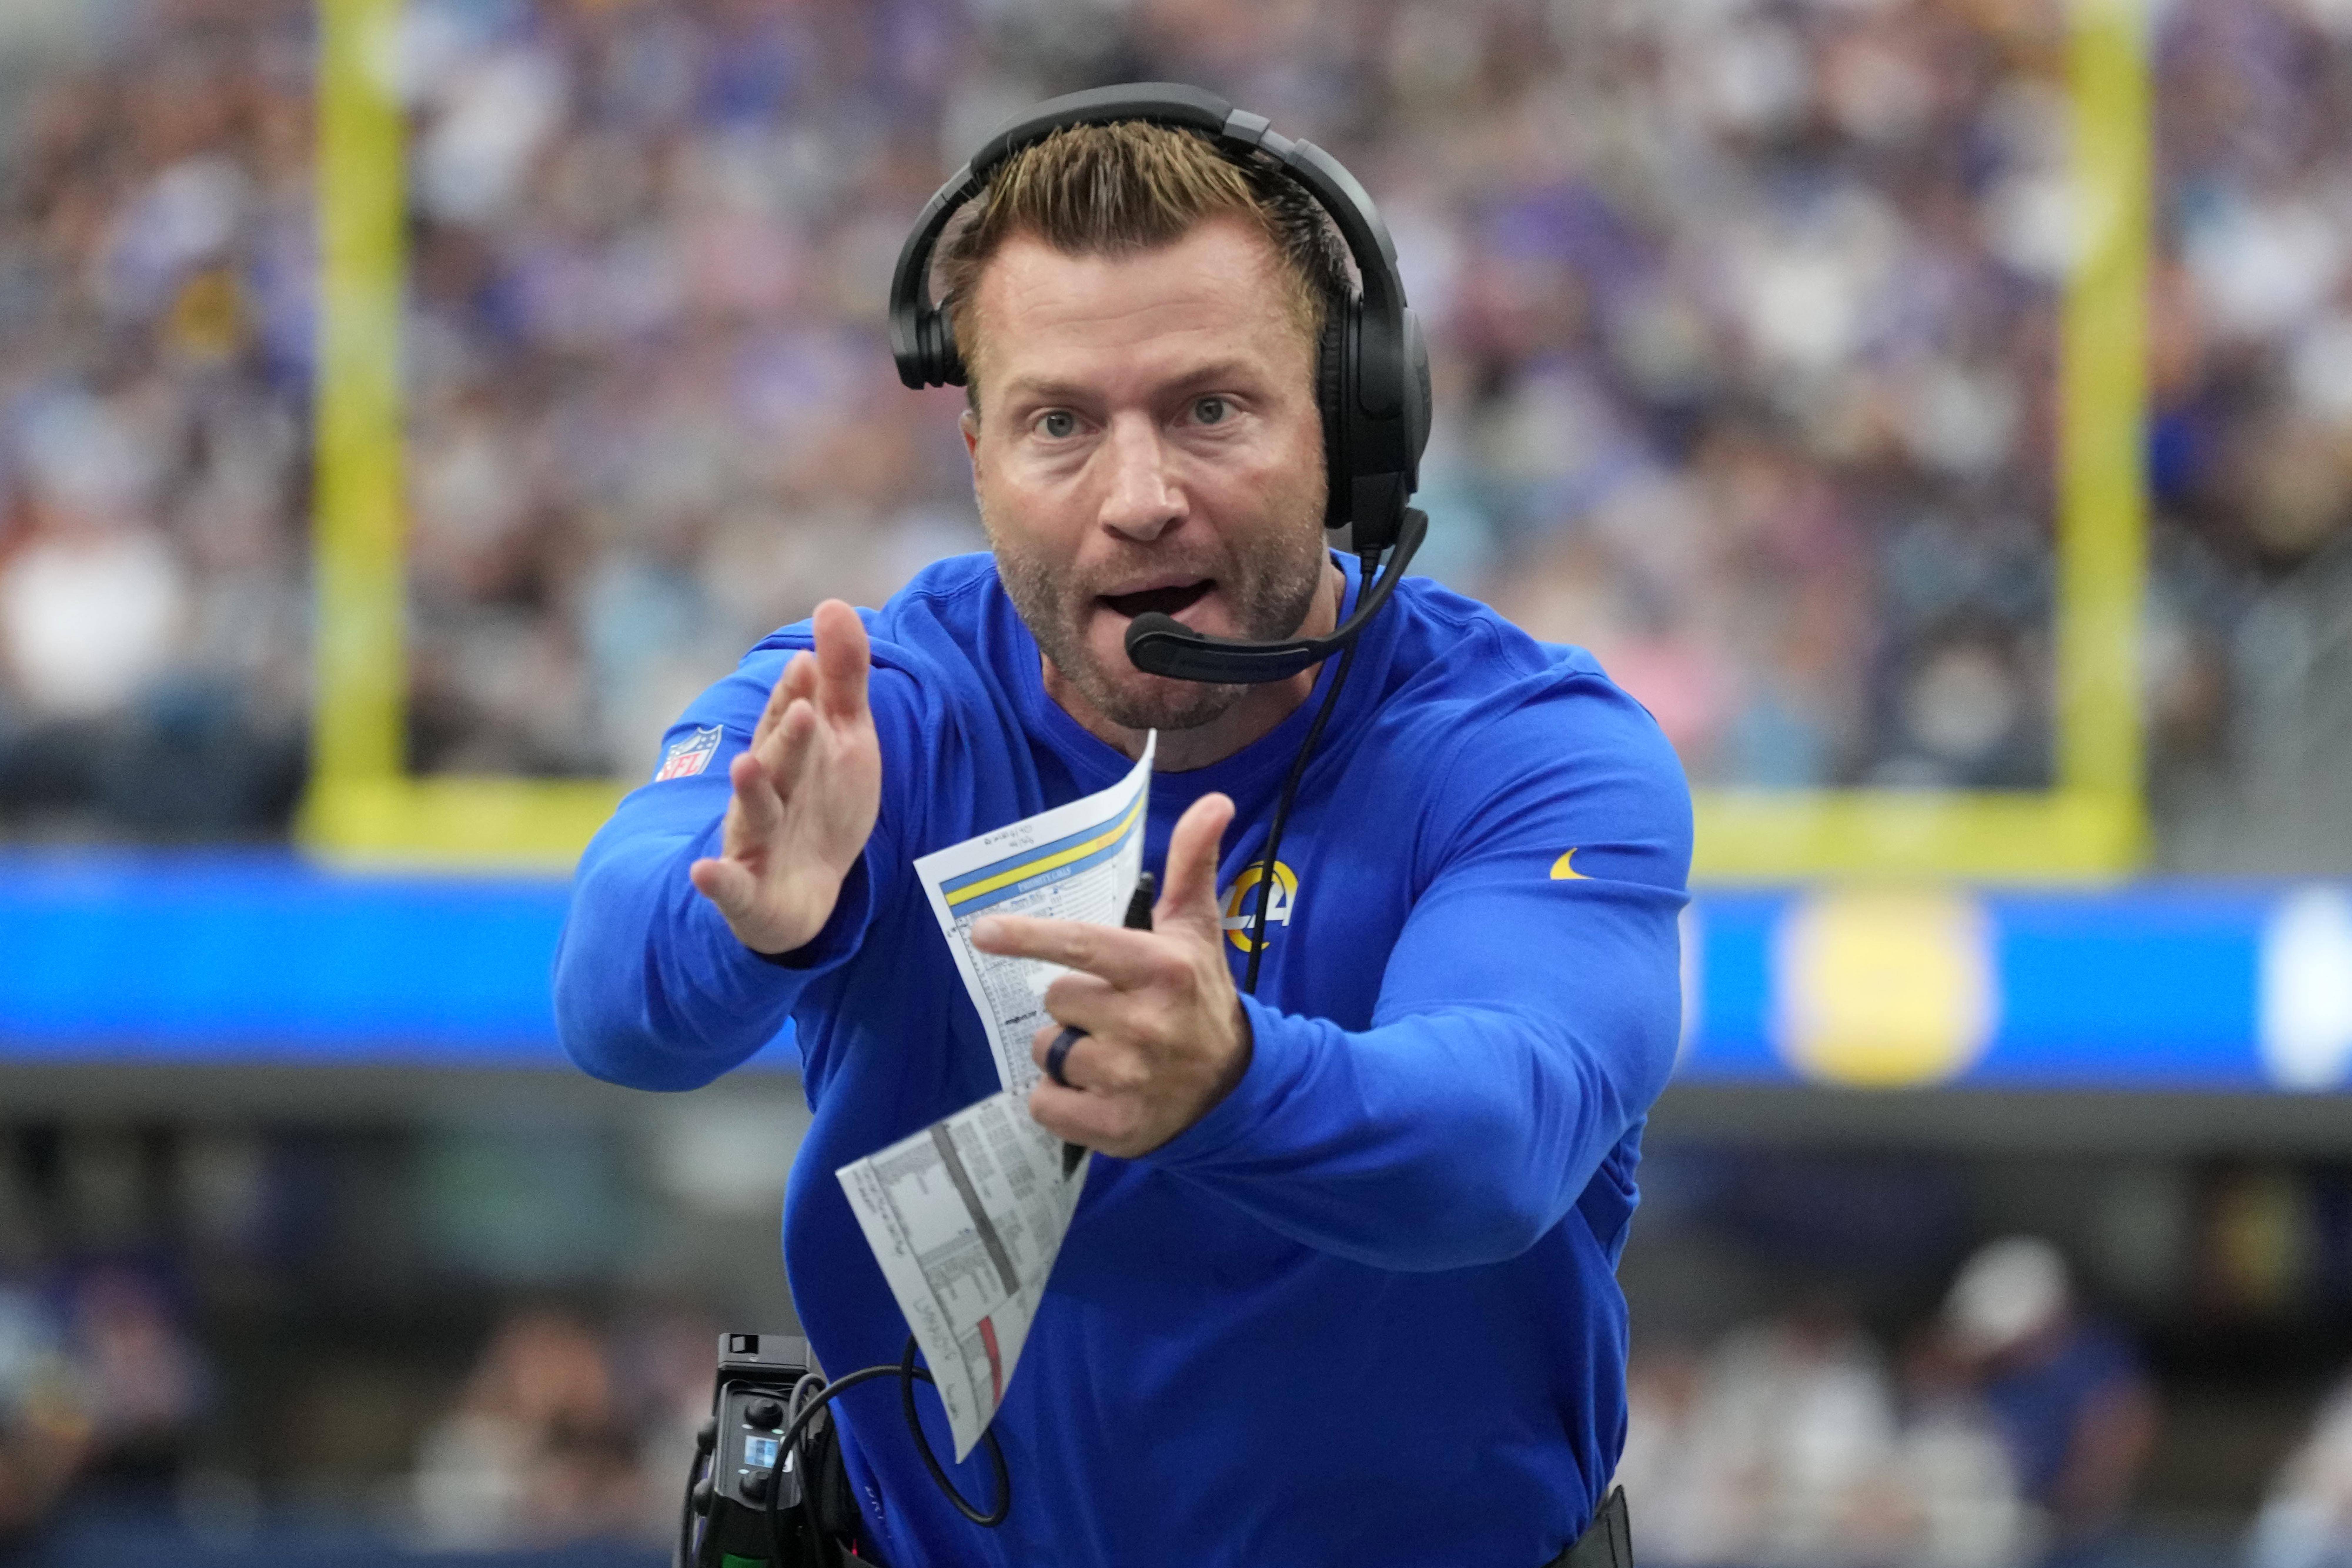 Next Star Up? NFL TV Networks Eyeing Rams Coach Sean McVay